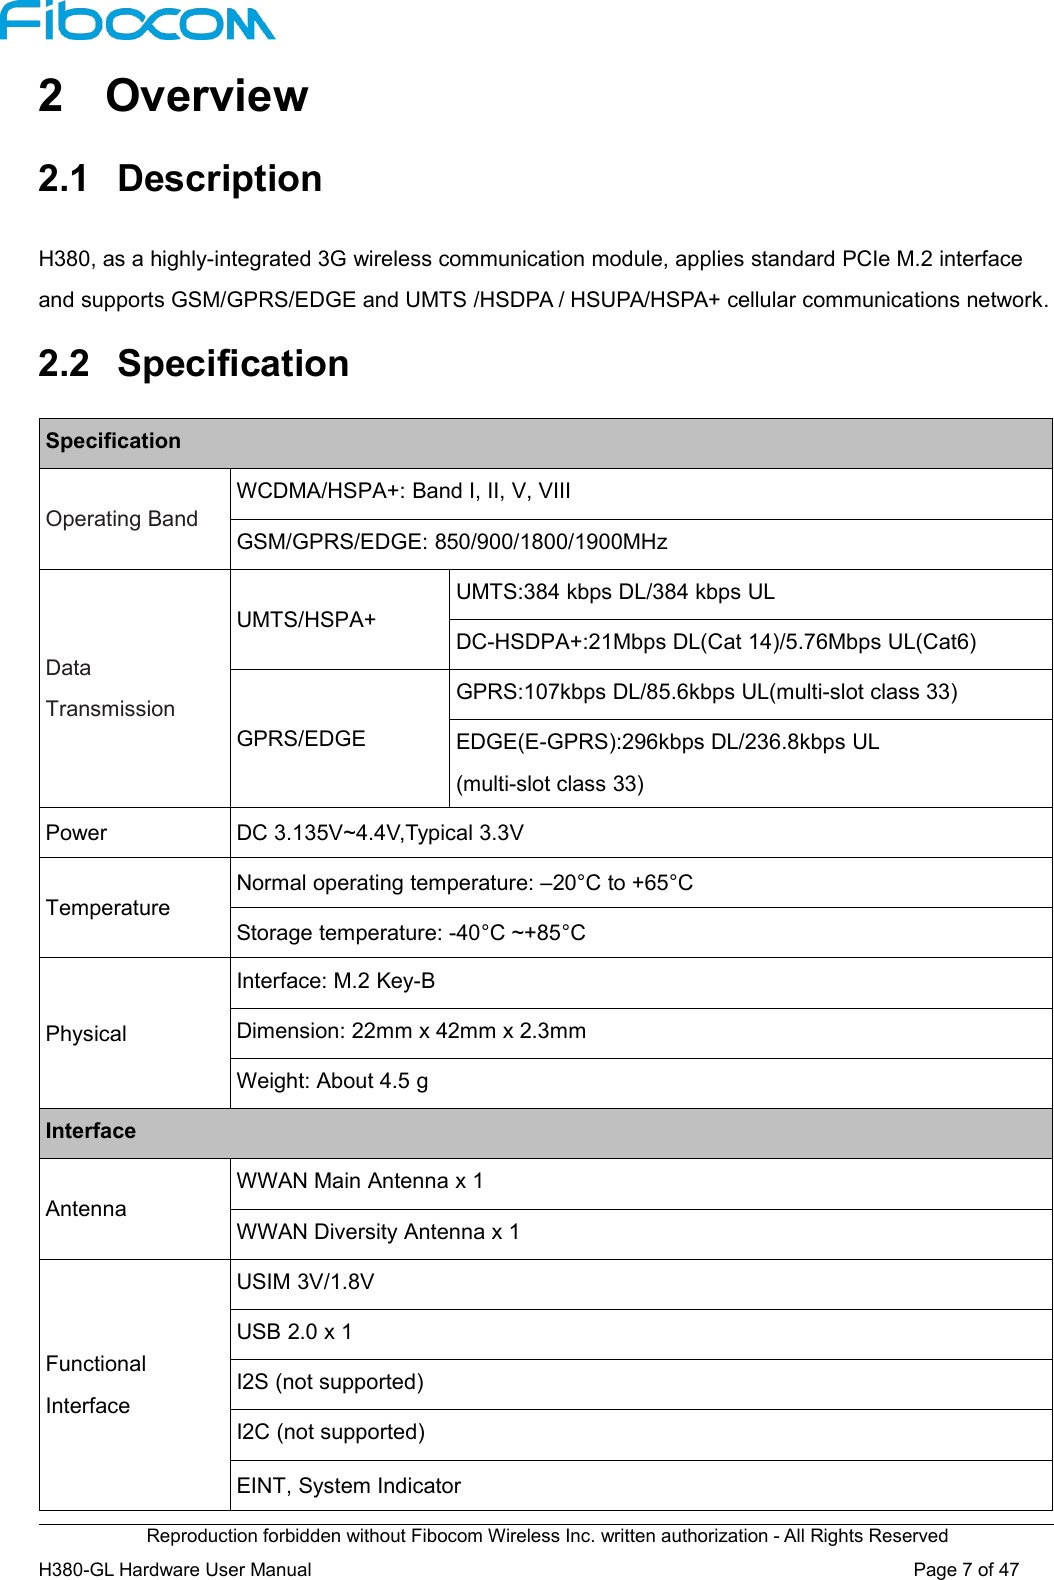 Reproduction forbidden without Fibocom Wireless Inc. written authorization - All Rights ReservedH380-GL Hardware User Manual Page7of472 Overview2.1 DescriptionH380, as a highly-integrated 3G wireless communication module, applies standard PCIe M.2 interfaceand supports GSM/GPRS/EDGE and UMTS /HSDPA / HSUPA/HSPA+ cellular communications network.2.2 SpecificationSpecificationOperating BandWCDMA/HSPA+: Band I, II, V, VIIIGSM/GPRS/EDGE: 850/900/1800/1900MHzDataTransmissionUMTS/HSPA+UMTS:384 kbps DL/384 kbps ULDC-HSDPA+:21Mbps DL(Cat 14)/5.76Mbps UL(Cat6)GPRS/EDGEGPRS:107kbps DL/85.6kbps UL(multi-slot class 33)EDGE(E-GPRS):296kbps DL/236.8kbps UL(multi-slot class 33)PowerDC 3.135V~4.4V,Typical 3.3VTemperatureNormal operating temperature: –20°C to +65°CStorage temperature: -40°C ~+85°CPhysicalInterface: M.2 Key-BDimension: 22mm x 42mm x 2.3mmWeight: About 4.5 gInterfaceAntennaWWAN Main Antenna x 1WWAN Diversity Antenna x 1FunctionalInterfaceUSIM 3V/1.8VUSB 2.0 x 1I2S (not supported)I2C (not supported)EINT, System Indicator